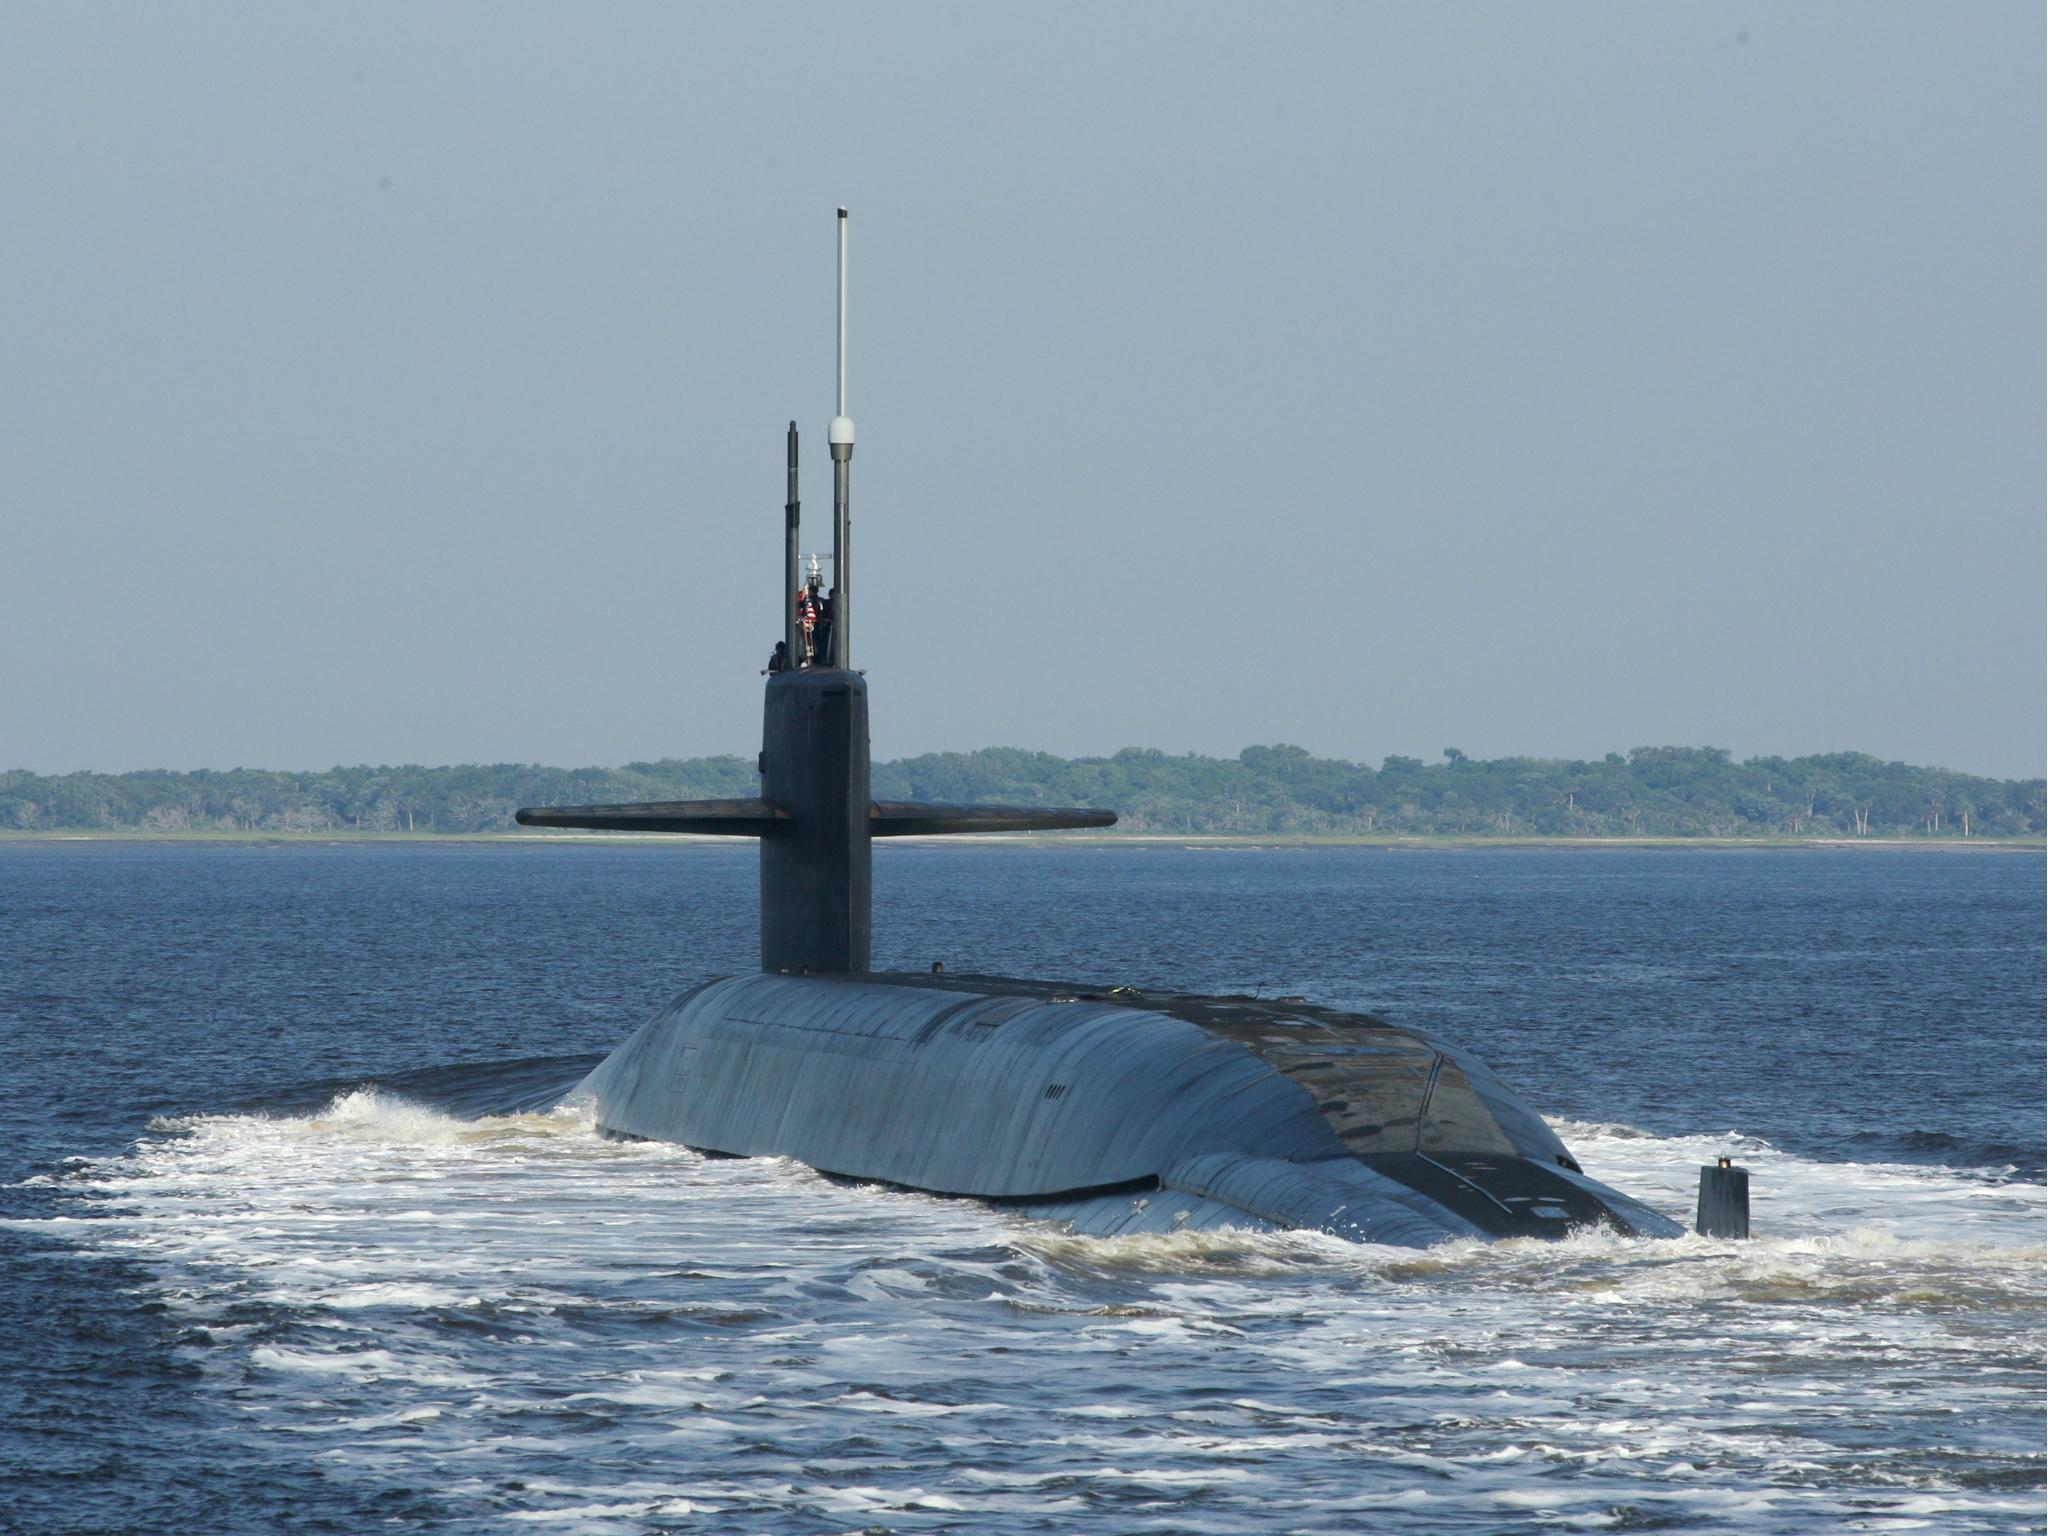 The Ohio-class ballistic-missile submarine USS Alaska returns to Naval Submarine Base Kings Bay following a patrol, in in this May 2014, handout photo provided by the US Navy.